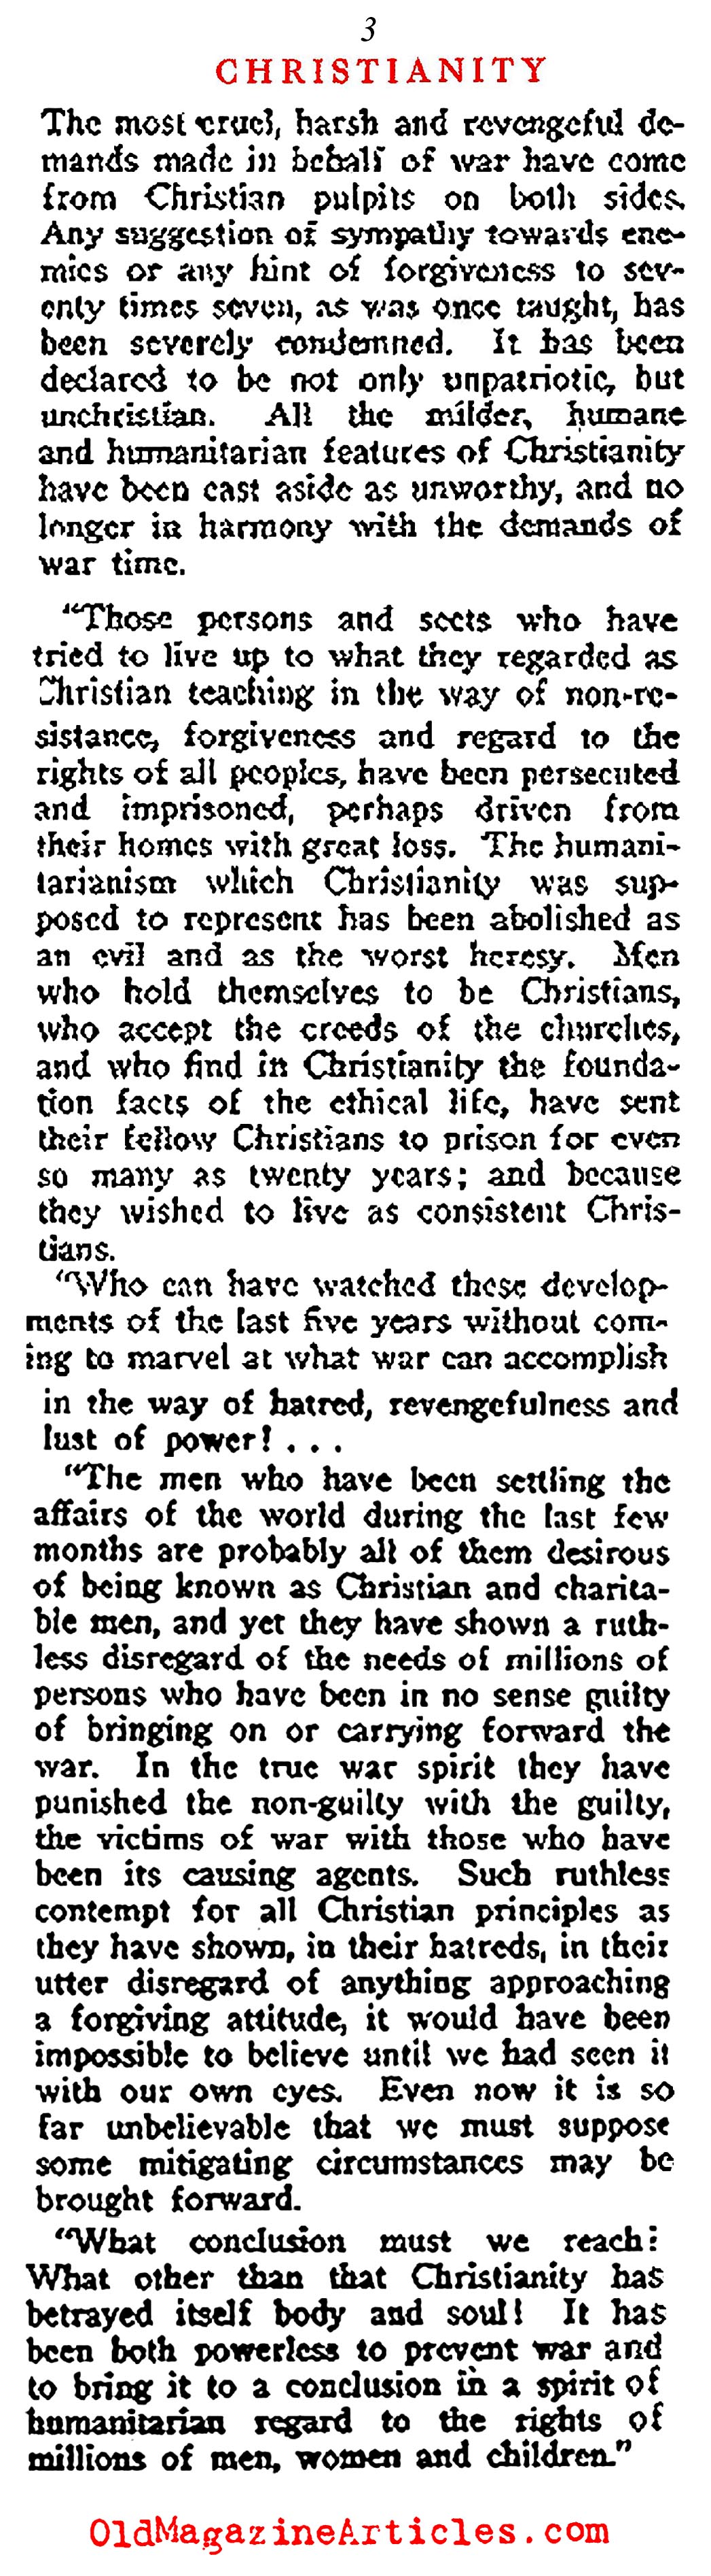 The Spiritual Disillusion of the 1920s (Current Opinion, 1919)